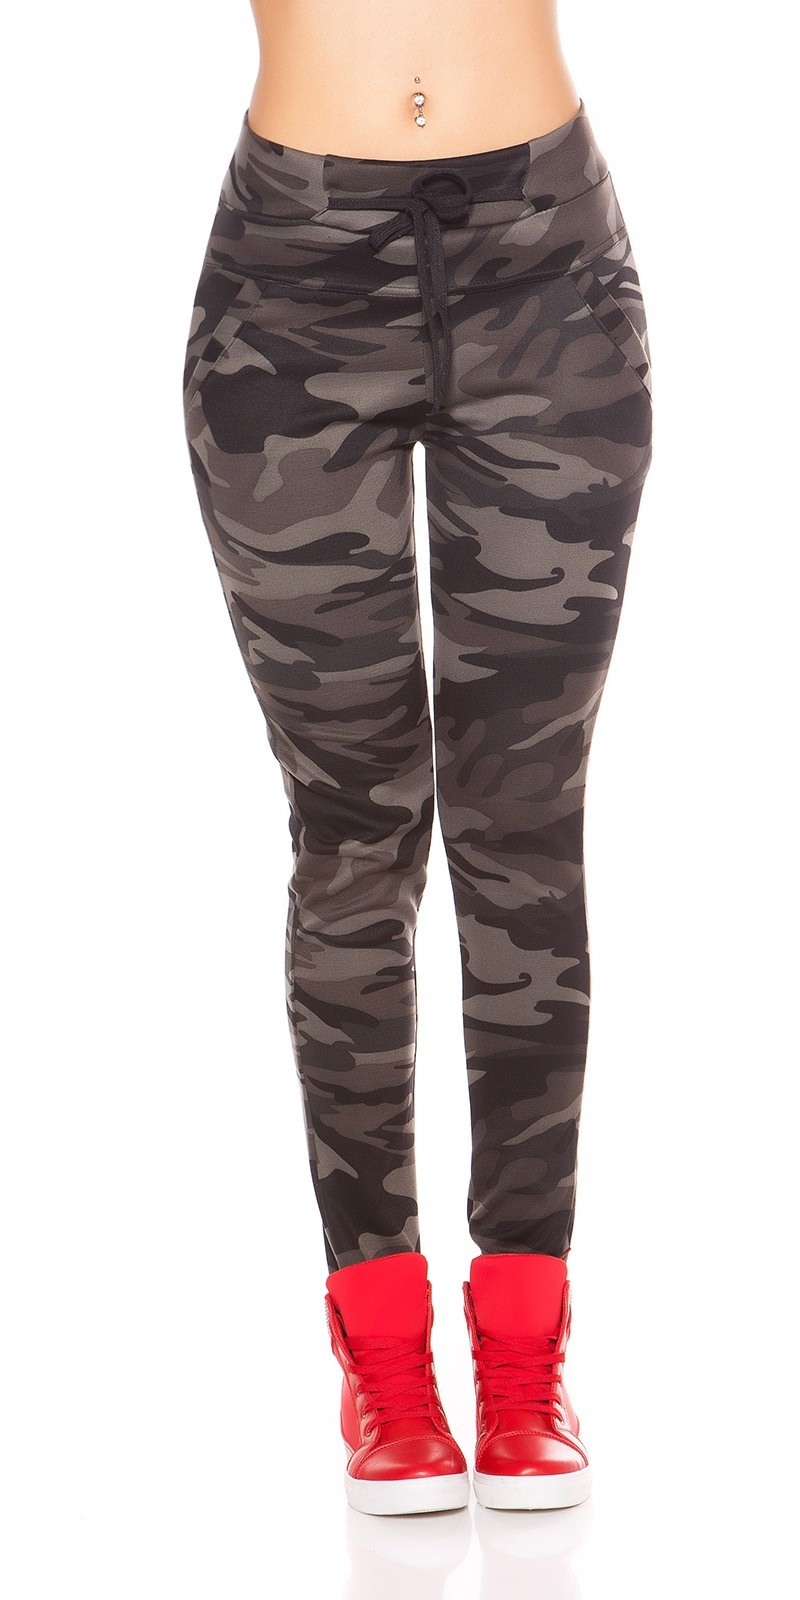 Sexy leggings in camouflage grijs